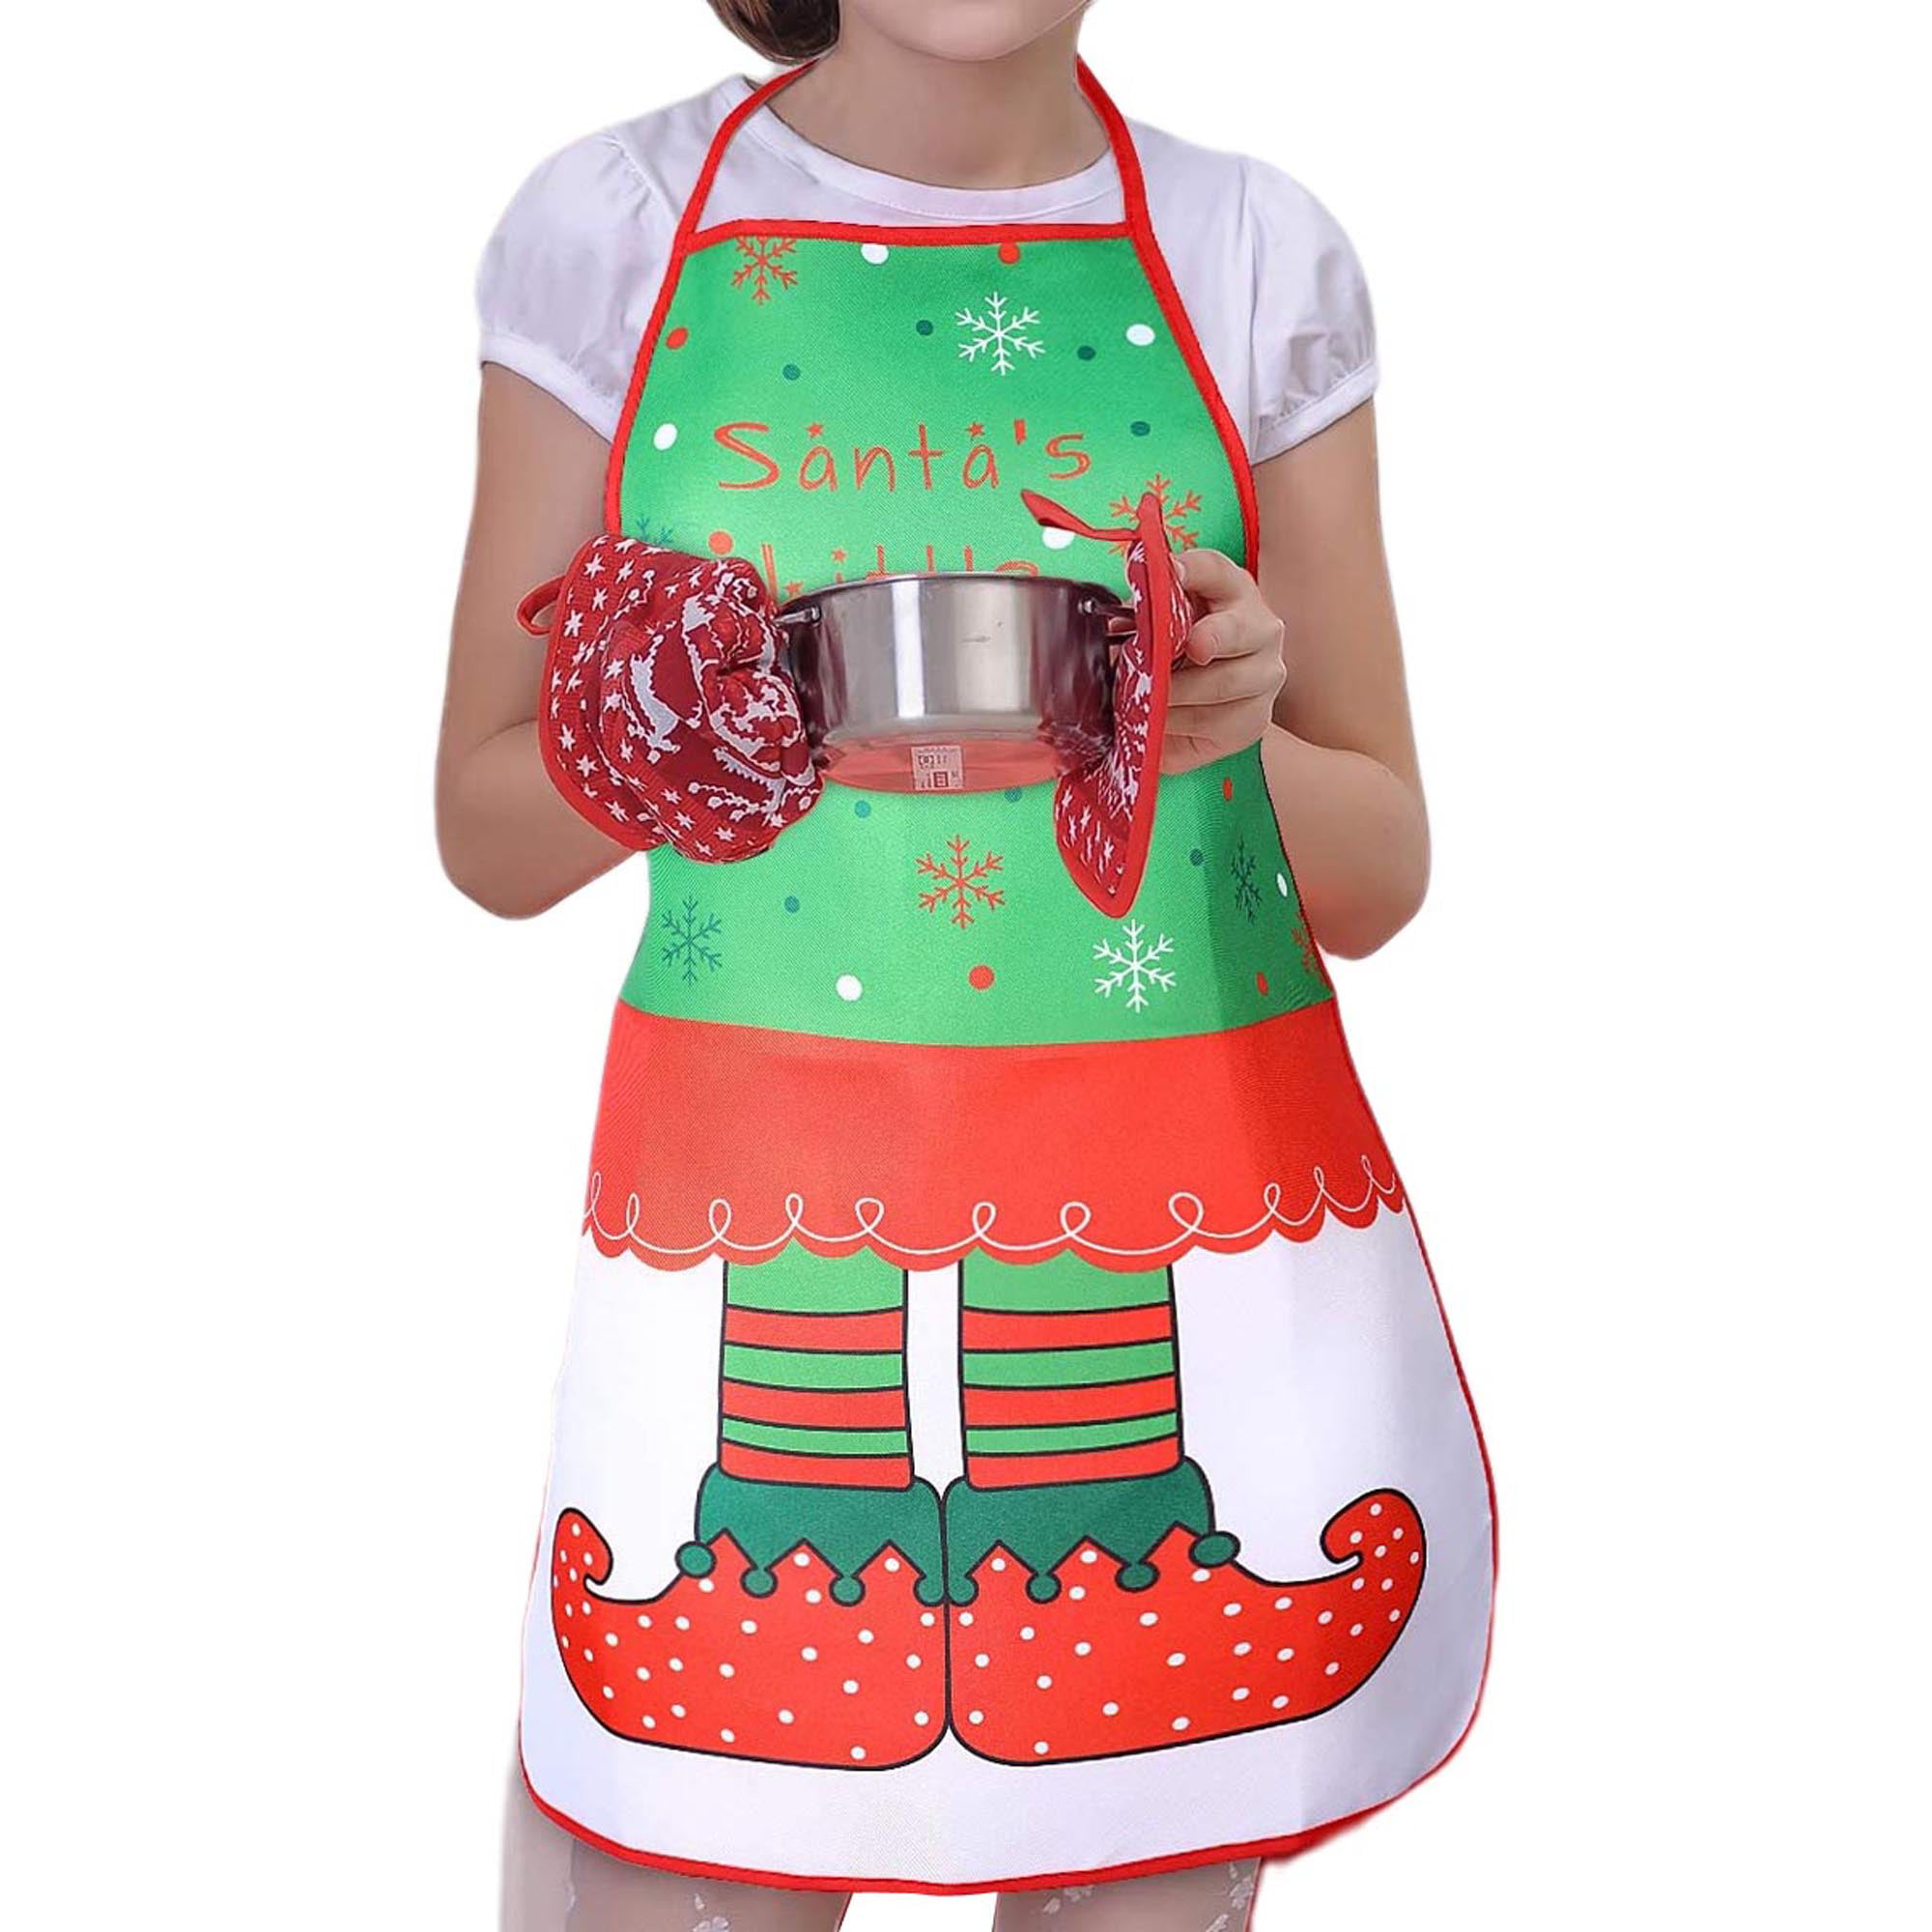 NEW ~ Christmas Apron with Santa Claus Jacket Design FREE SHIPPING 